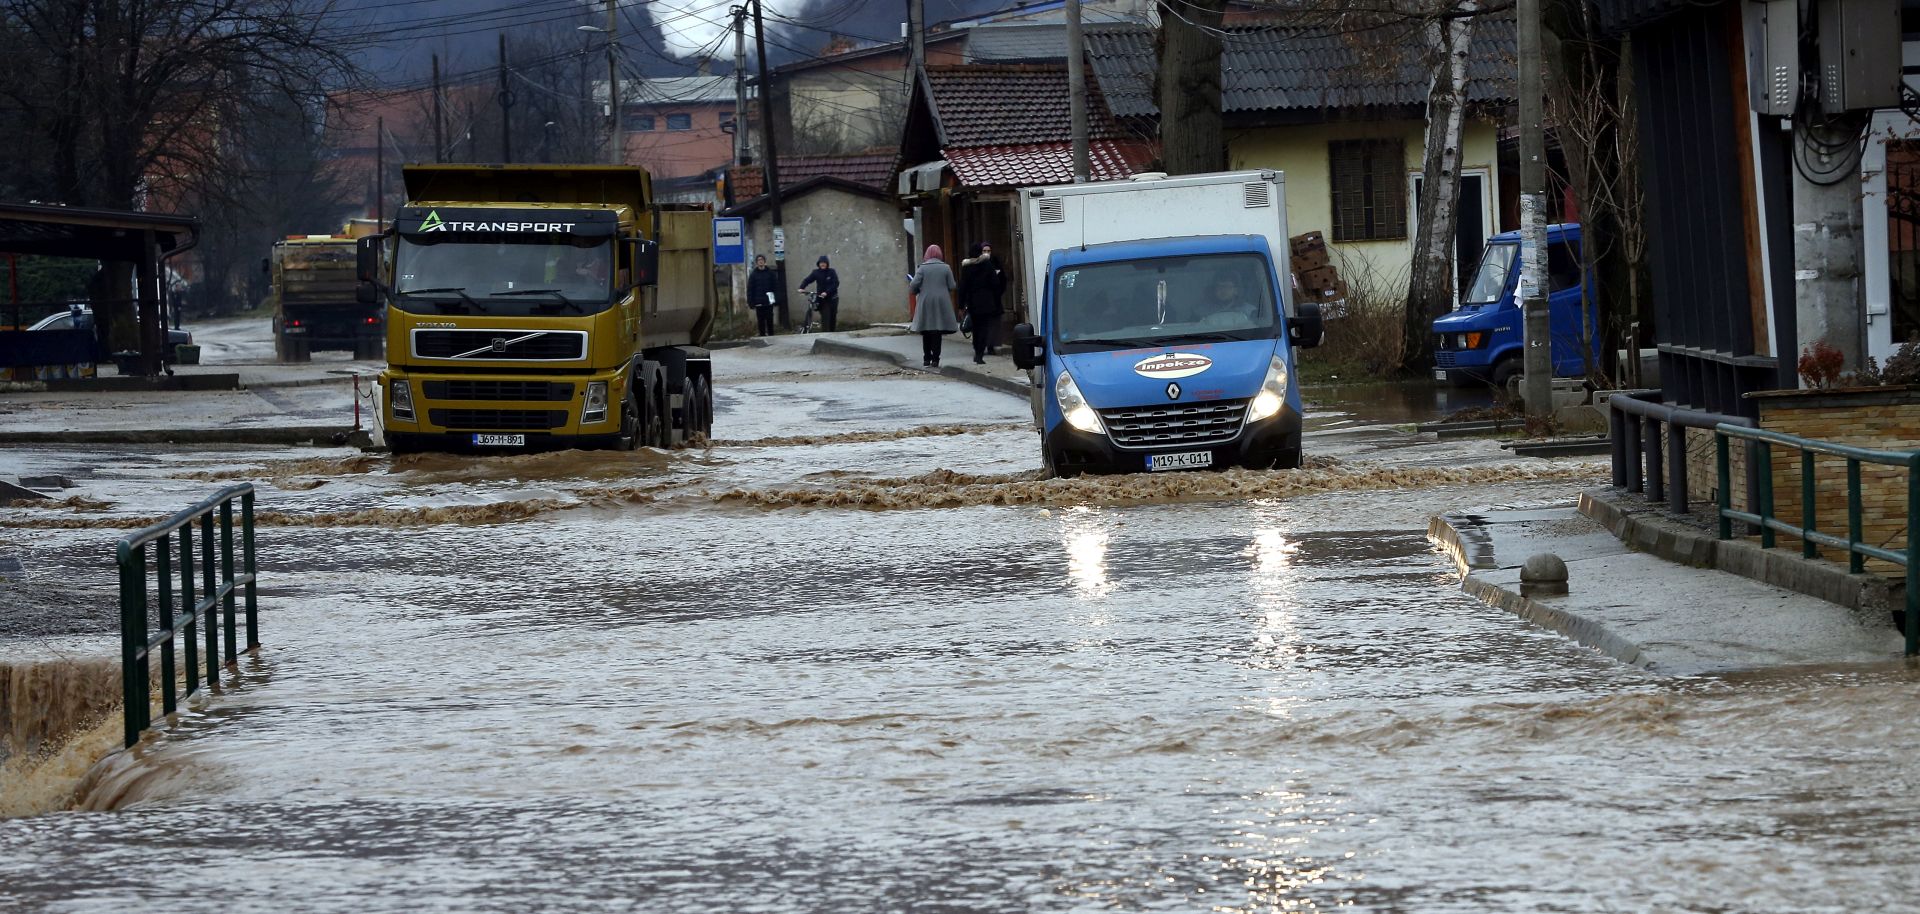 epa07342890 Floodwater flows in the village of Nemila, near Zenica town in Central Bosnia, Bosnia and Herzegovina, 04 February 2019. The region was hit by heavy rains, causing flooding in several areas.  EPA/FEHIM DEMIR